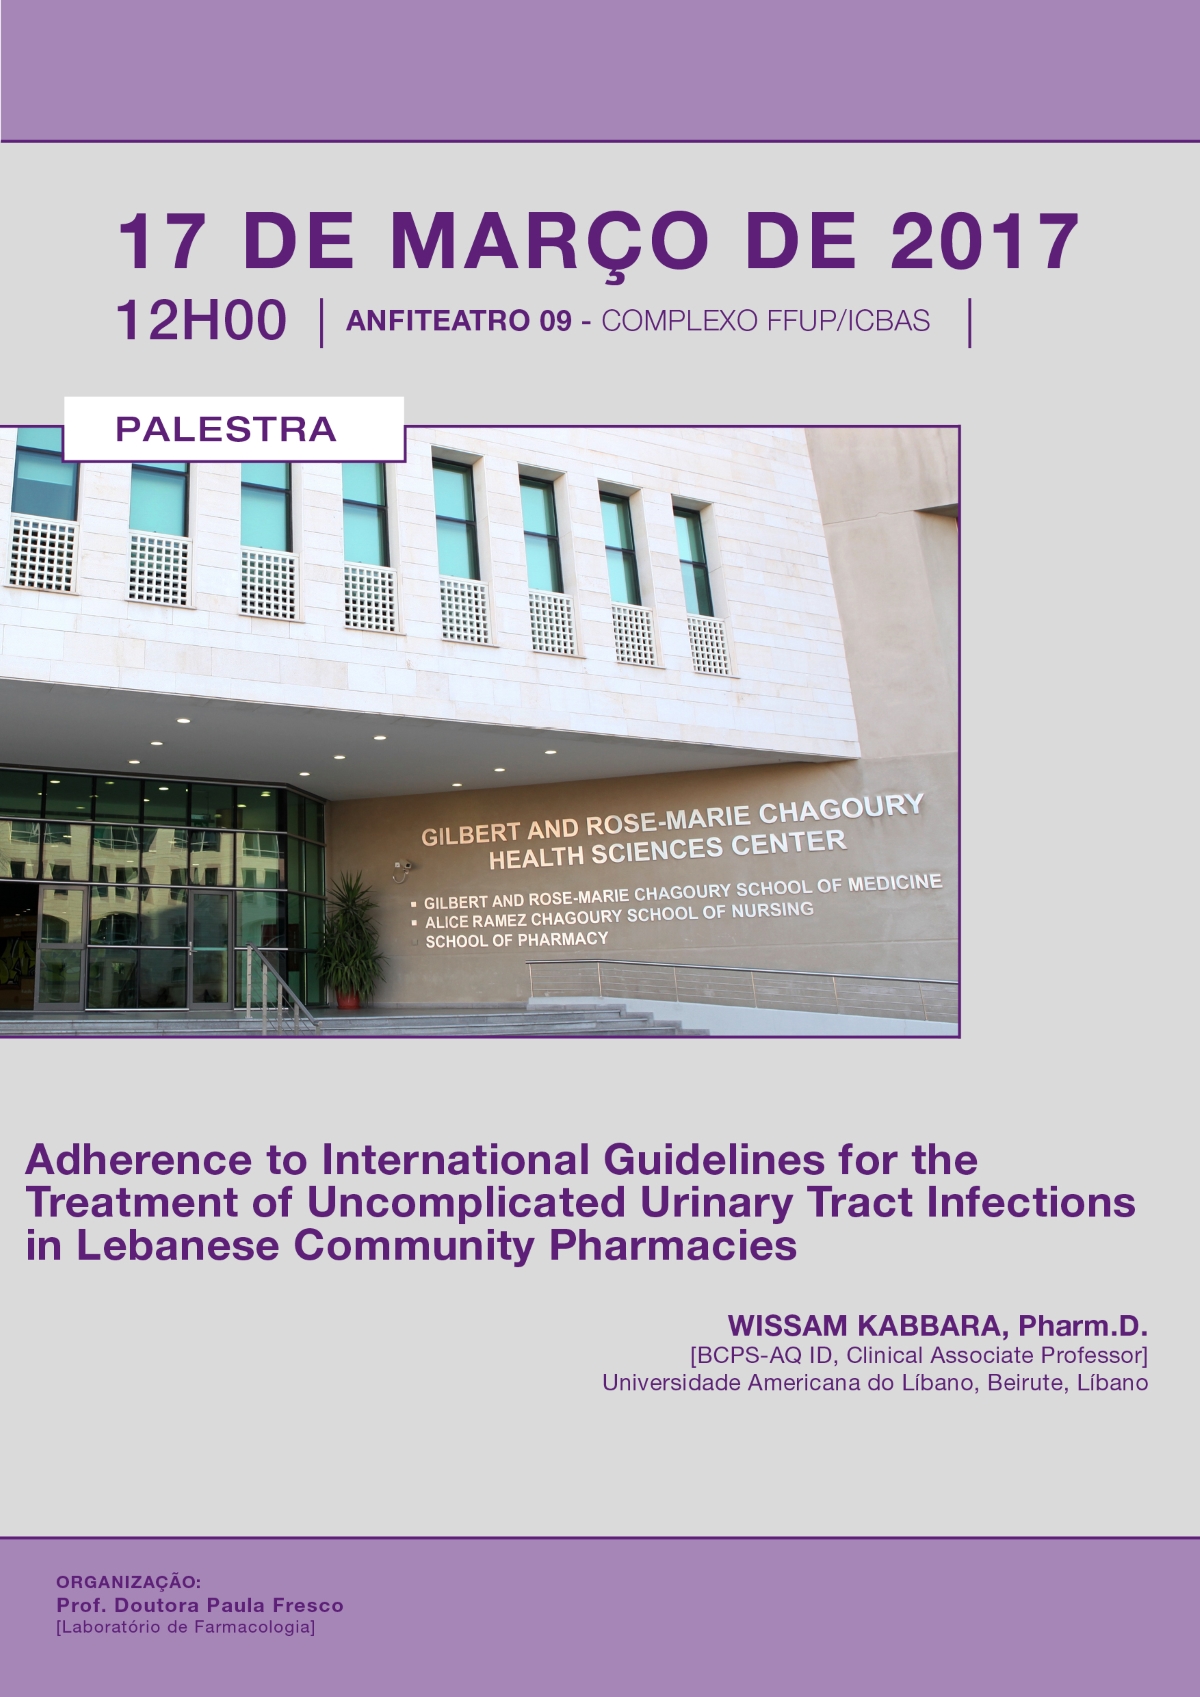 Palestra-Adherence to International Guidelines for the Treatment of Uncomplicated Urinary Tract Infections in Lebanese Community Pharmacies, dia 17 de maro, s 12 horas no Anfiteatro 9 do Complexo ICBAS/FFUP